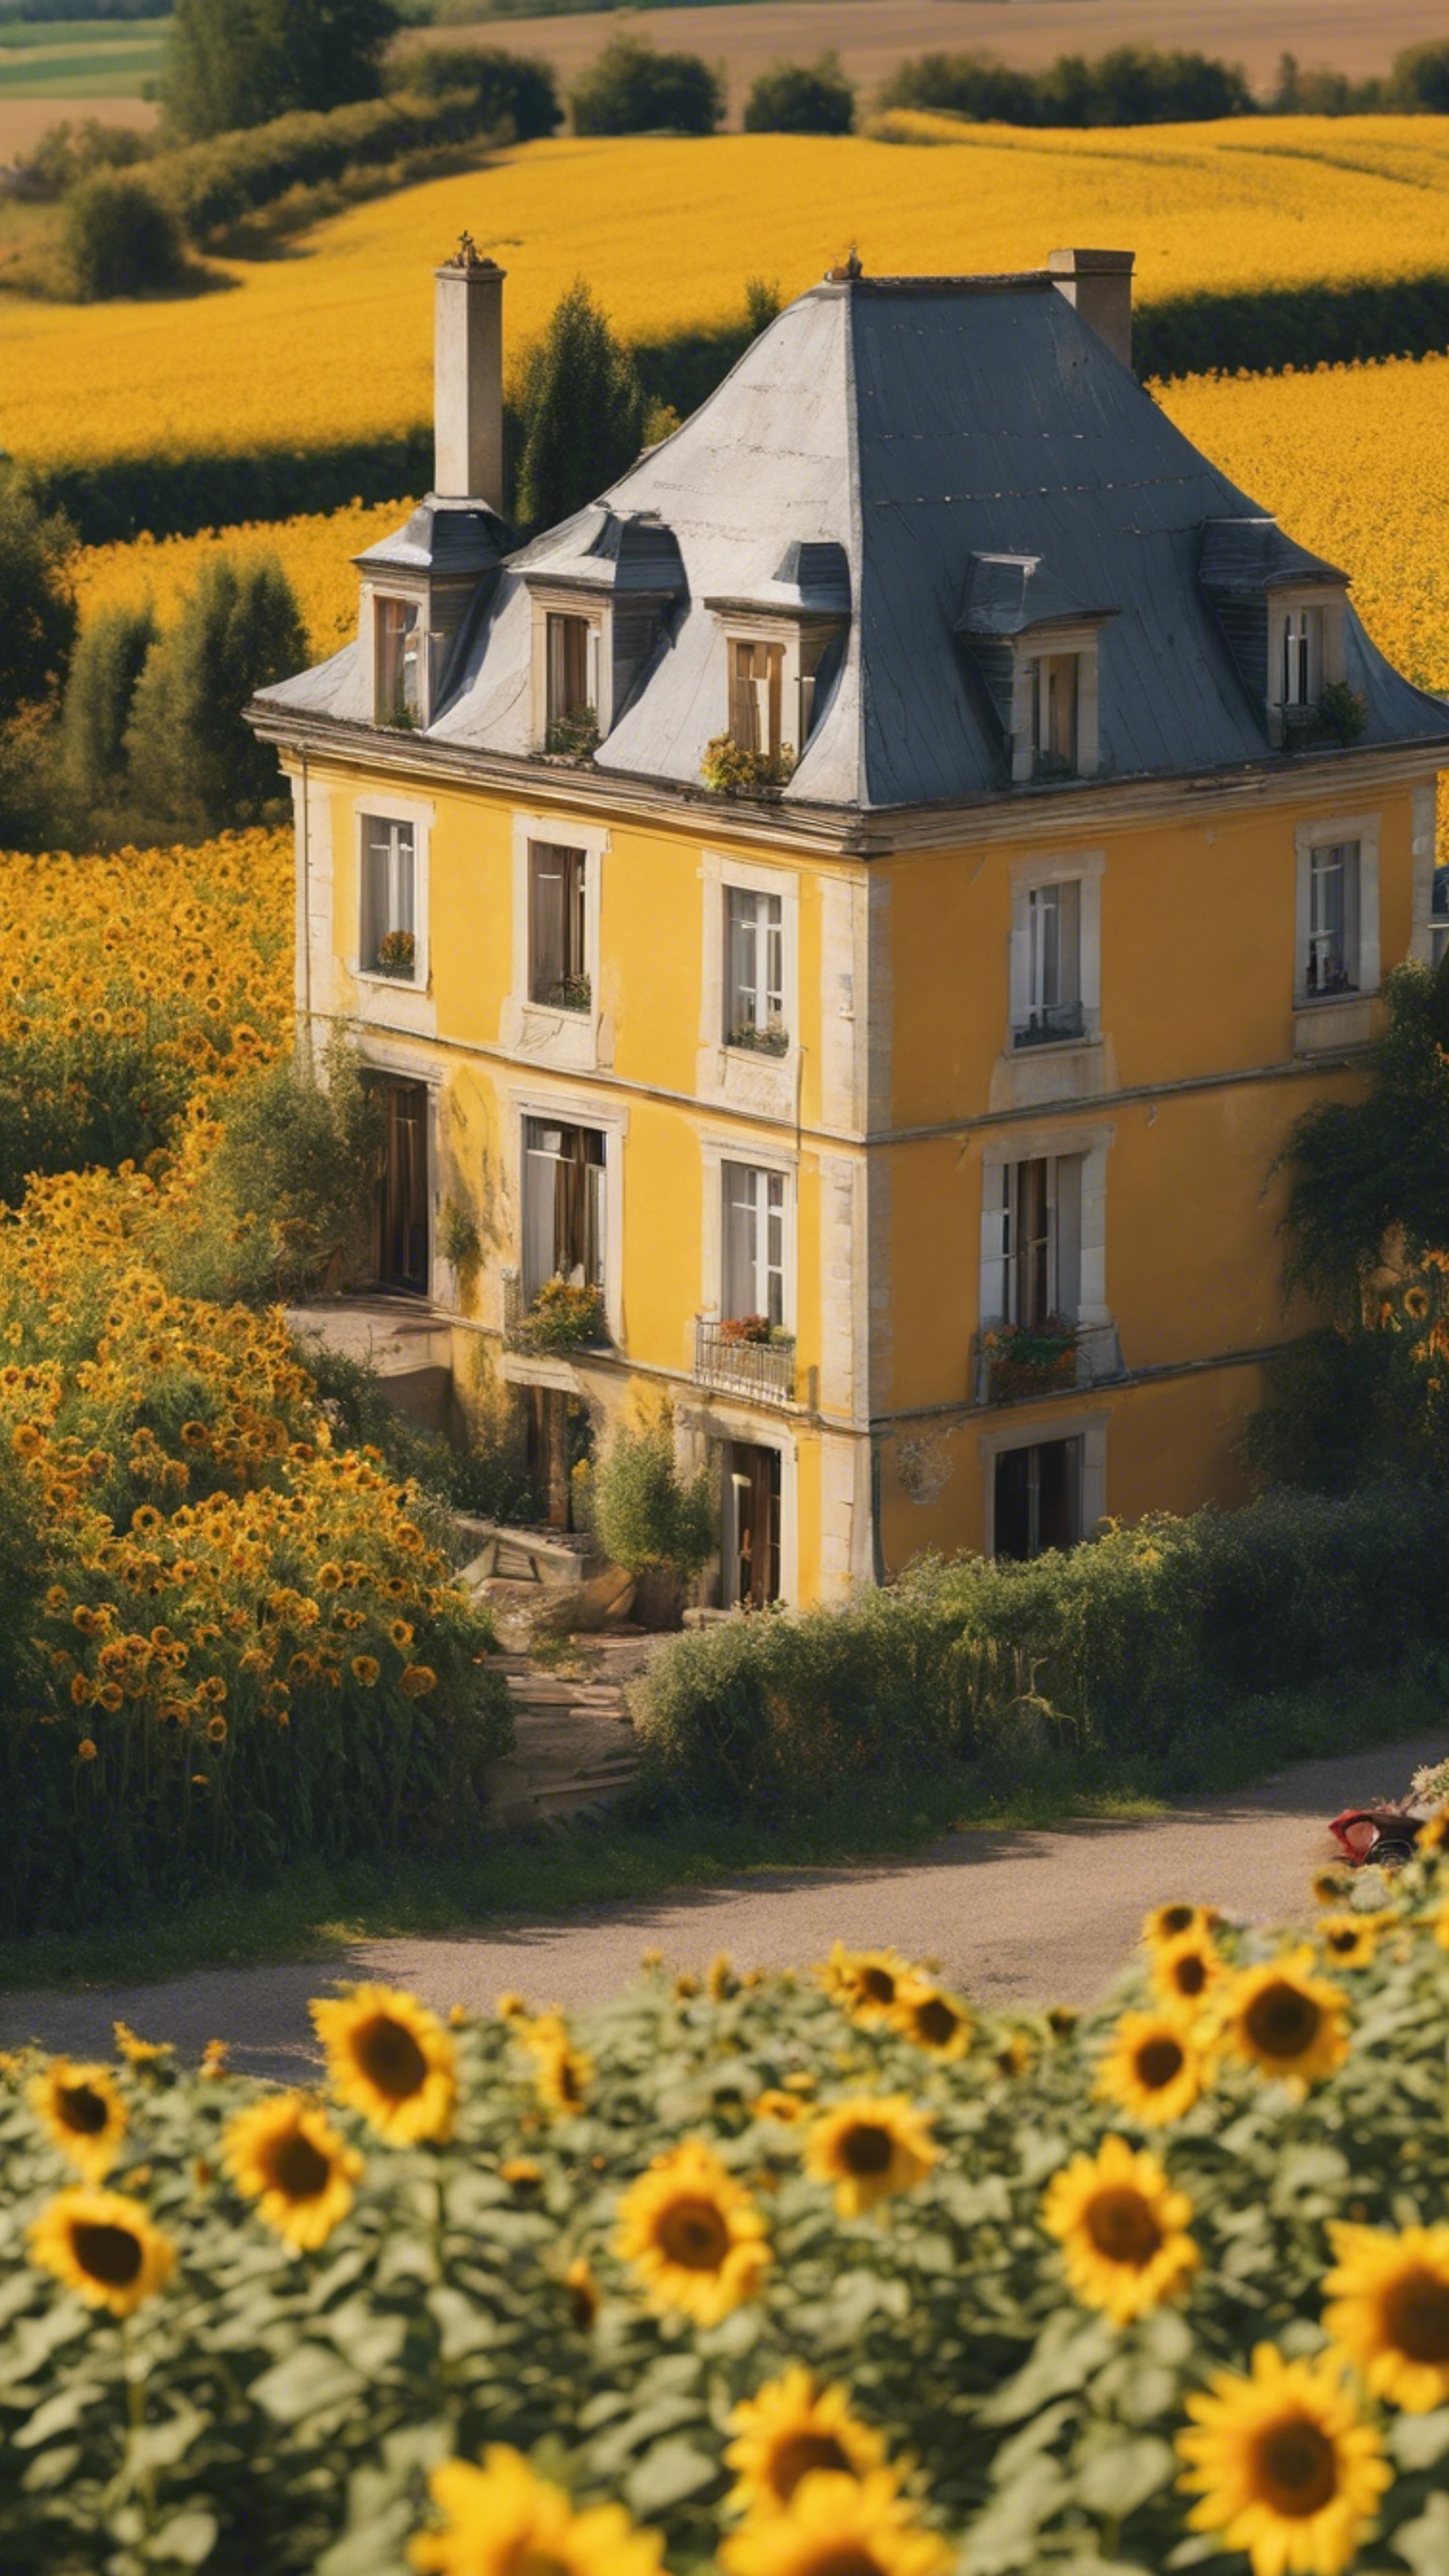 A quaint French country house nestled in a field of bright yellow sunflowers during a sunny afternoon.壁紙[7540a515ea0143d58f51]